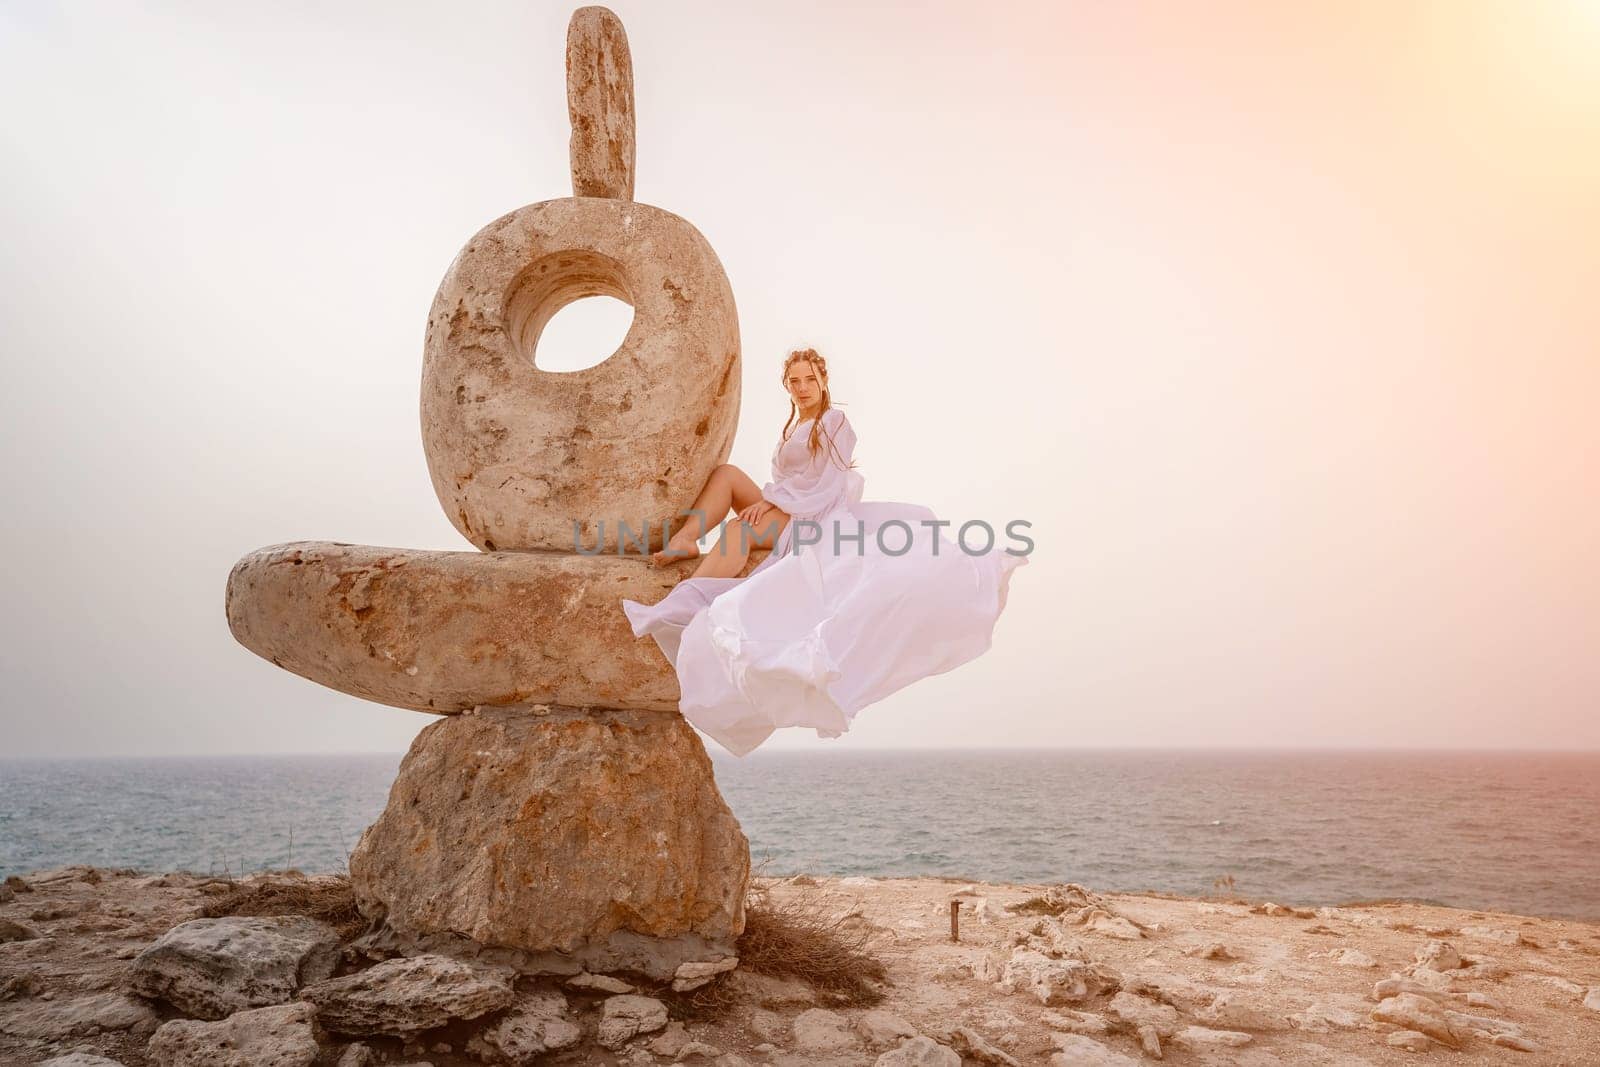 Woman sea stone. A woman stands on a stone sculpture made of large stones. She is dressed in a white long dress, against the backdrop of the sea and sky. The dress develops in the wind